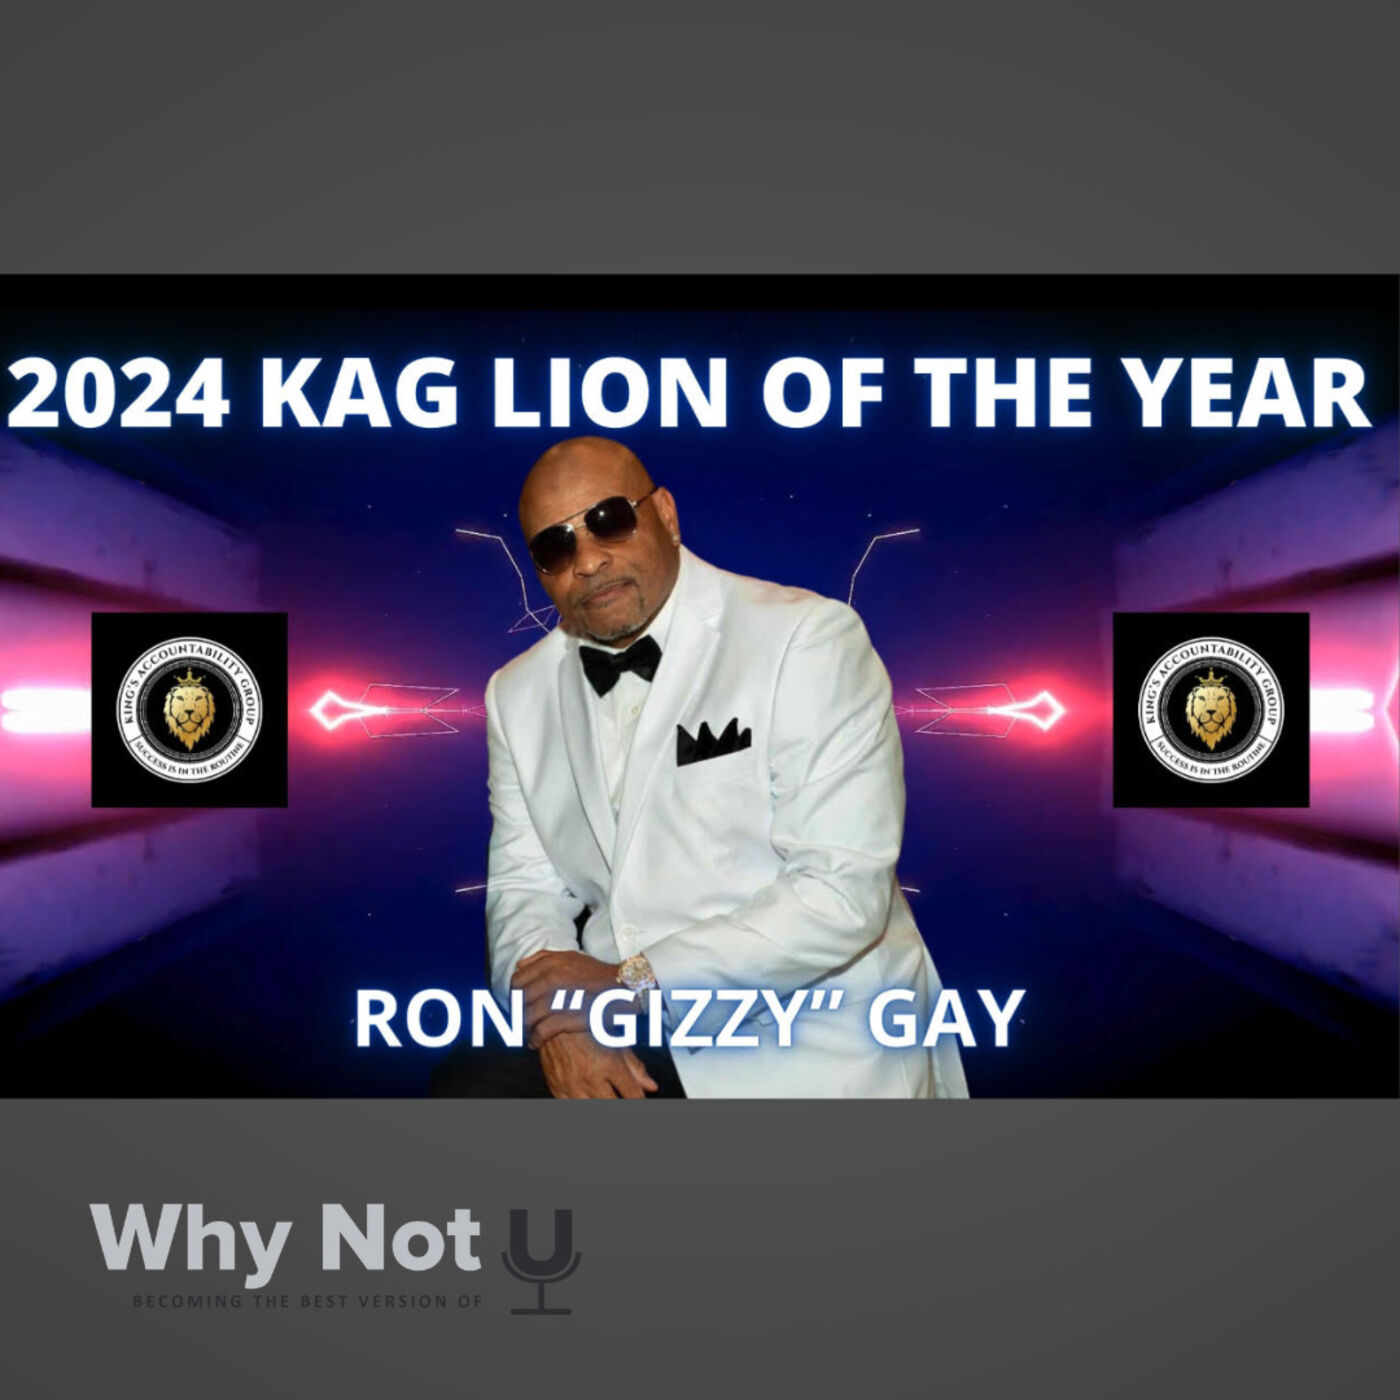 Lion of The Year - Ron "Gizzy" Gay